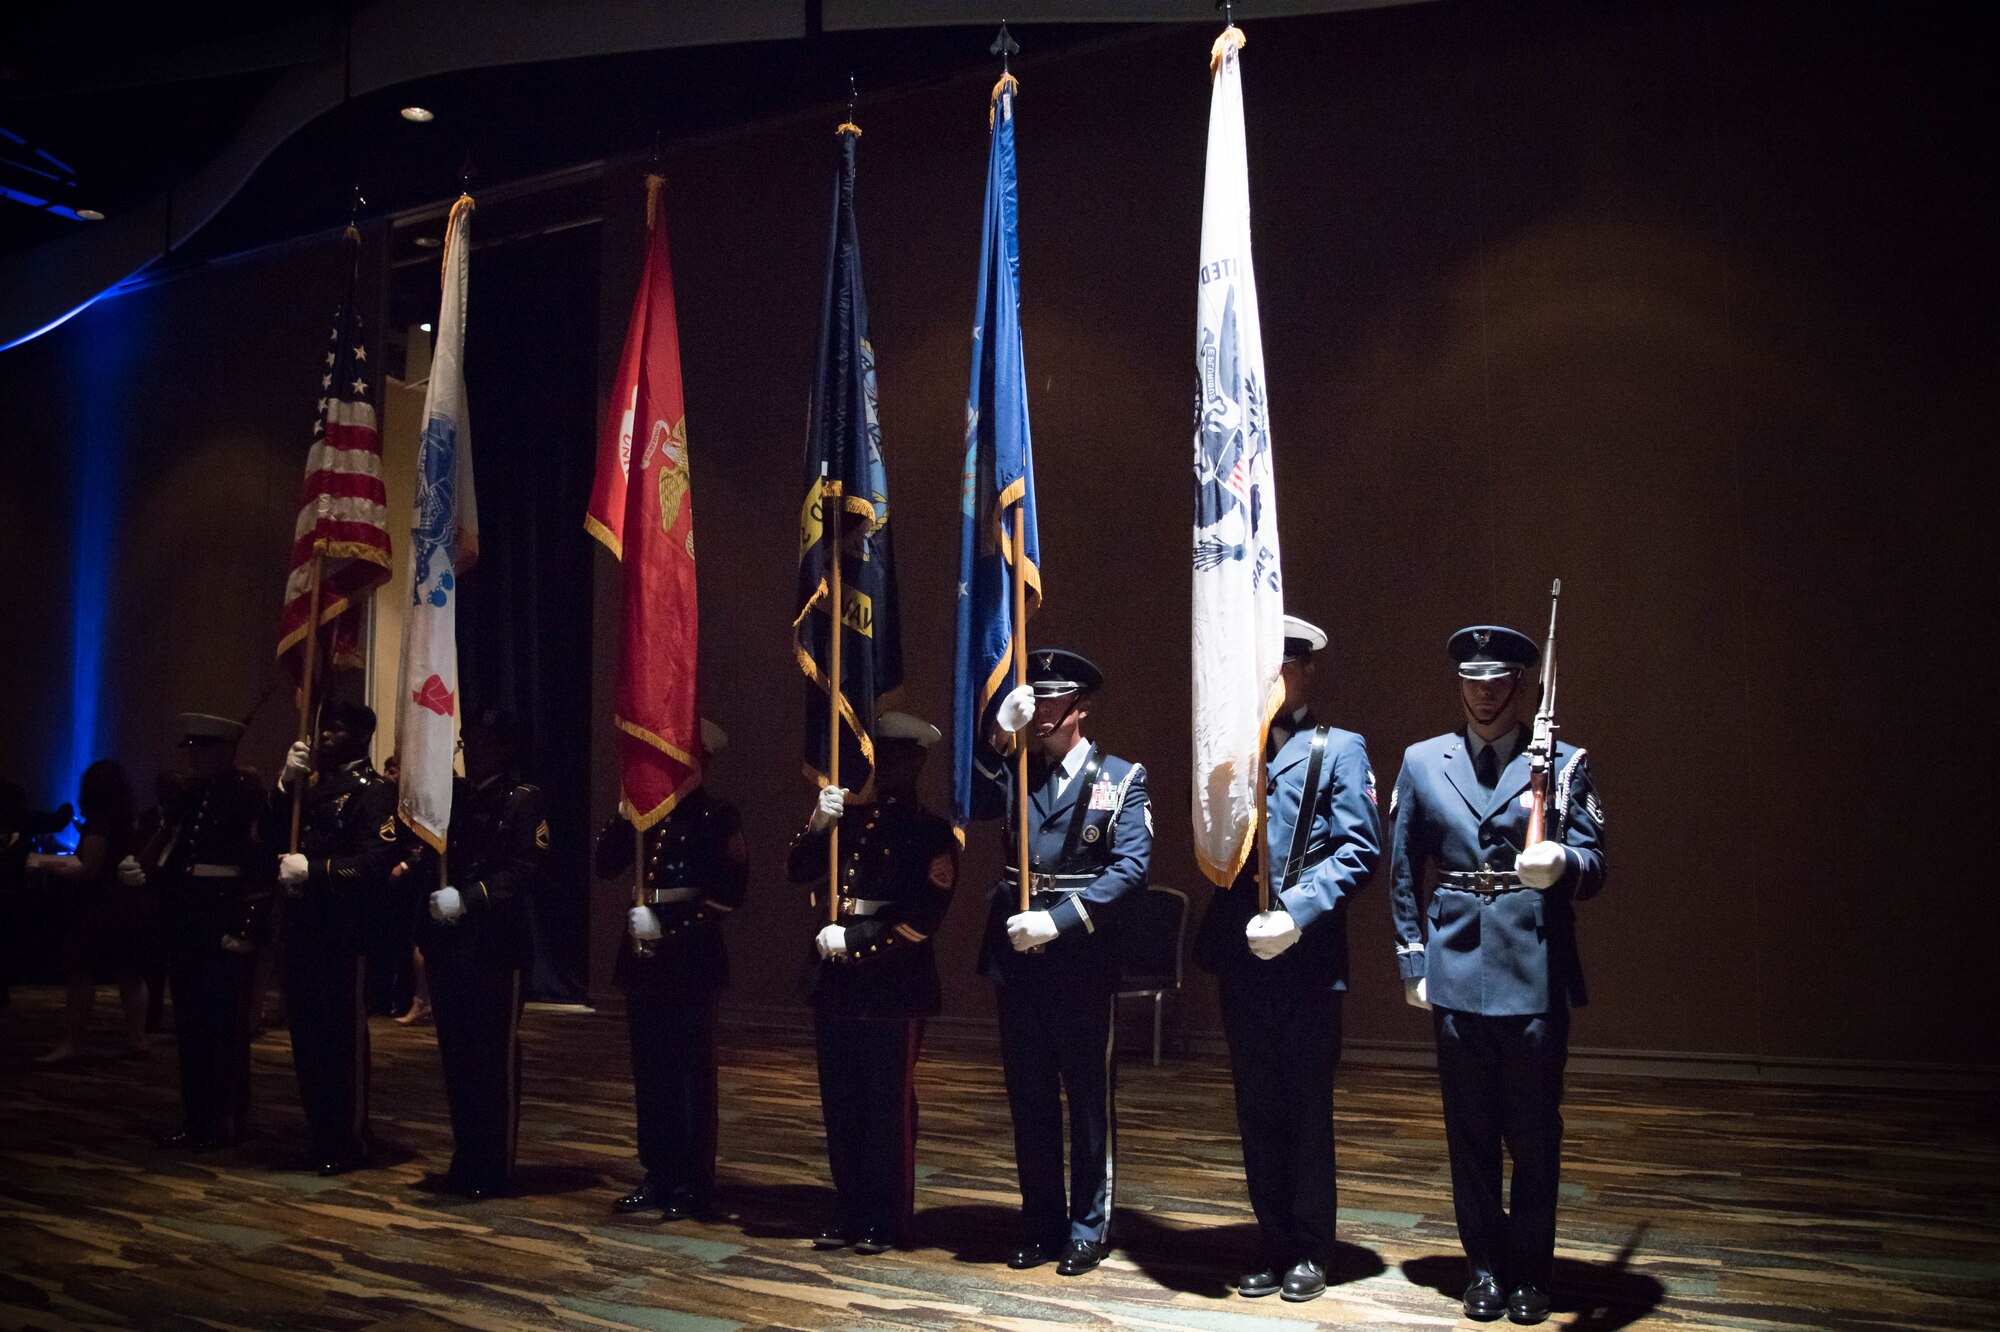 Military honor guard members from each branch of service prepare to post the colors during the 38th annual Salute to the Military Oct. 25 at the Gulf Coast Convention Center in Biloxi, Miss. (U.S. Air Force photo/Senior Airman Heather Heiney)